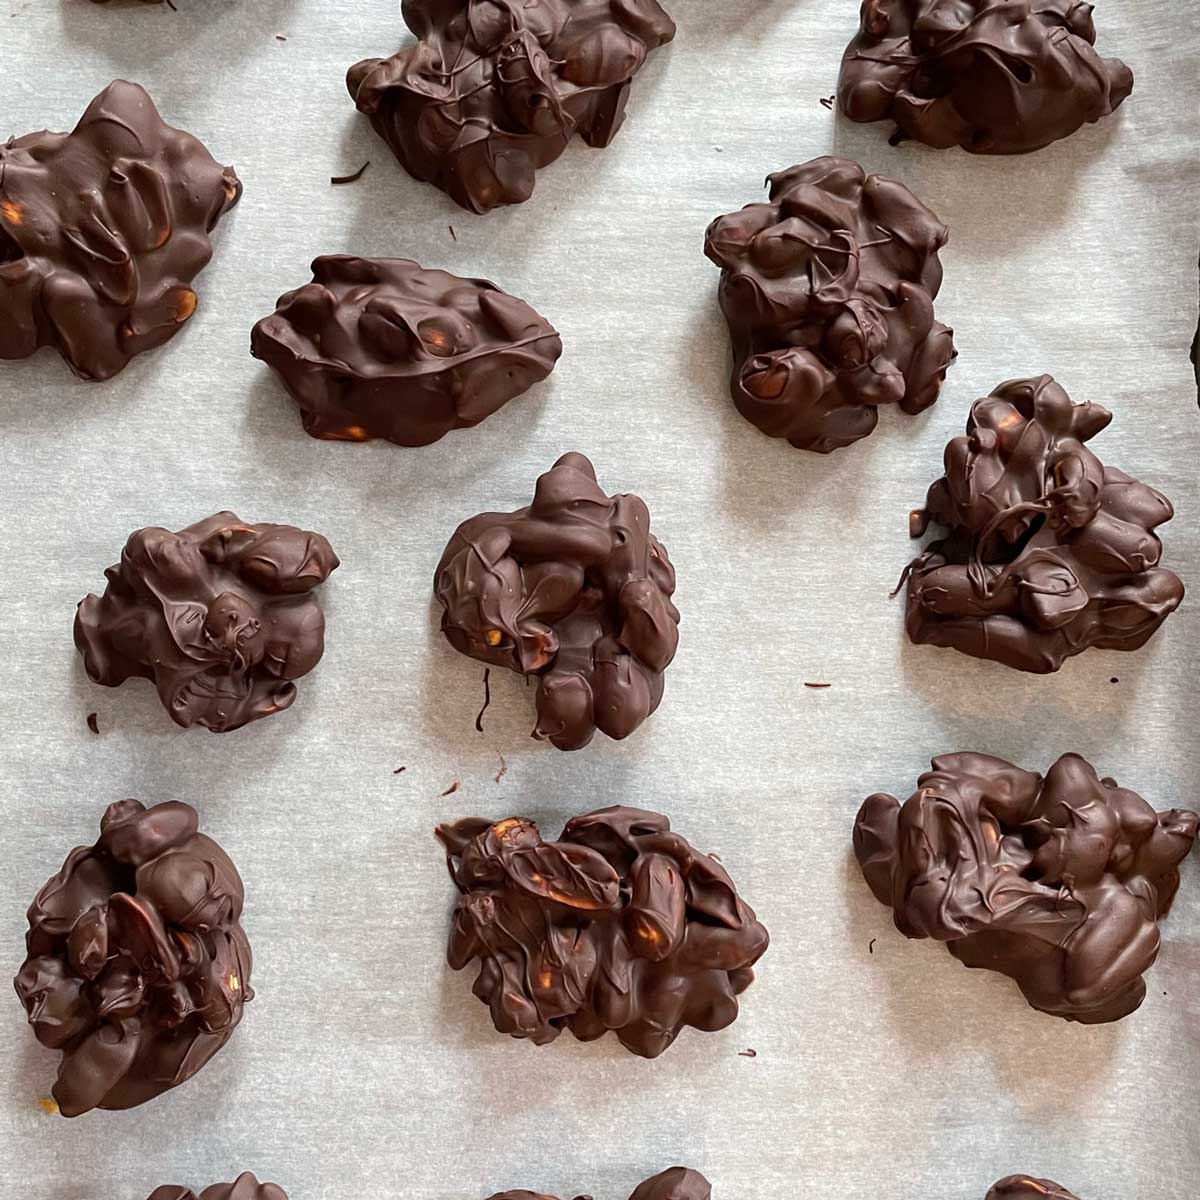 Chocolate covered peanuts dried.